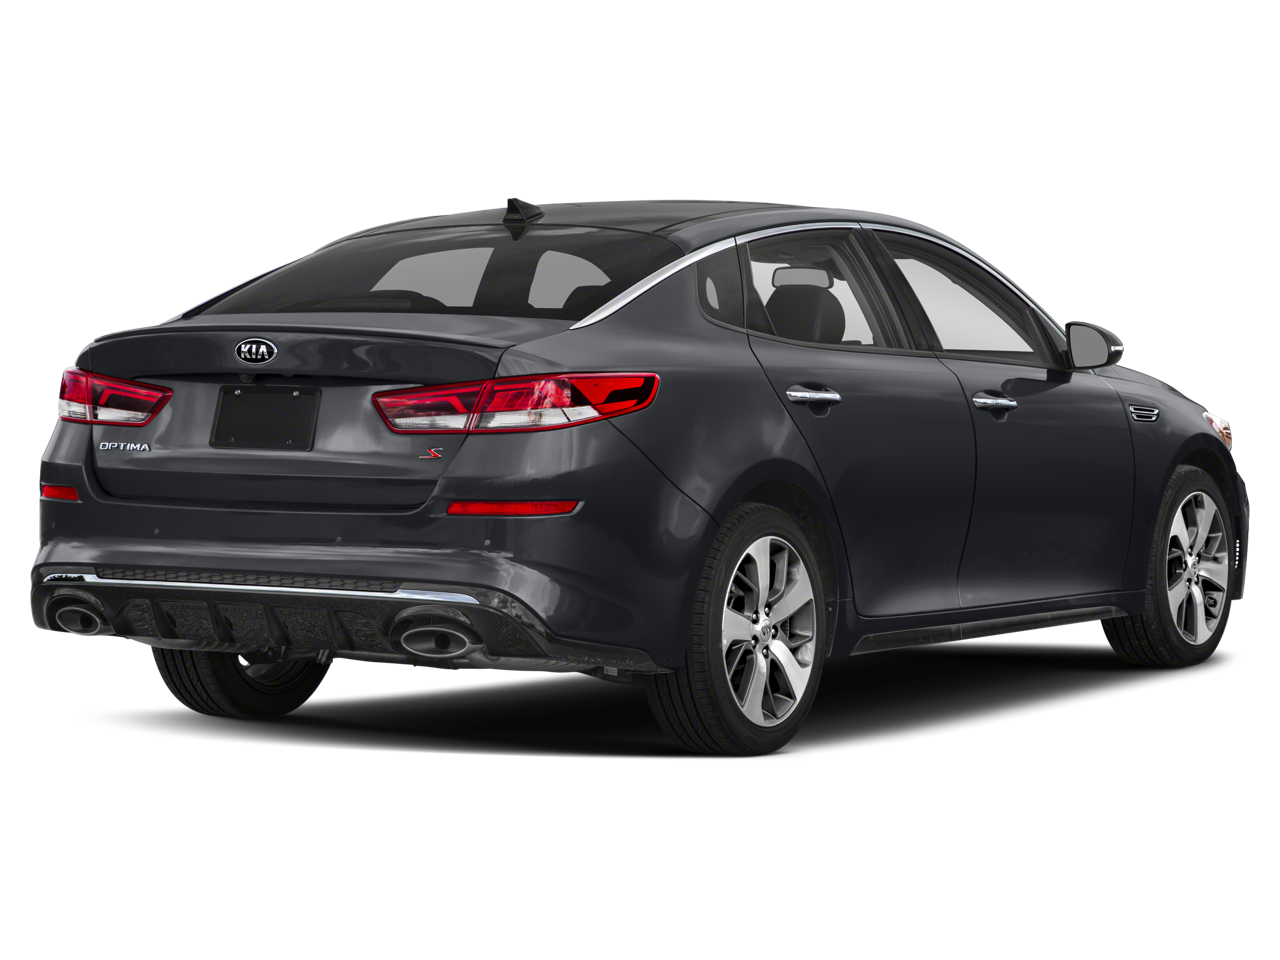 Used 2020 Kia Optima S with VIN 5XXGT4L32LG450593 for sale in Beech Island, SC